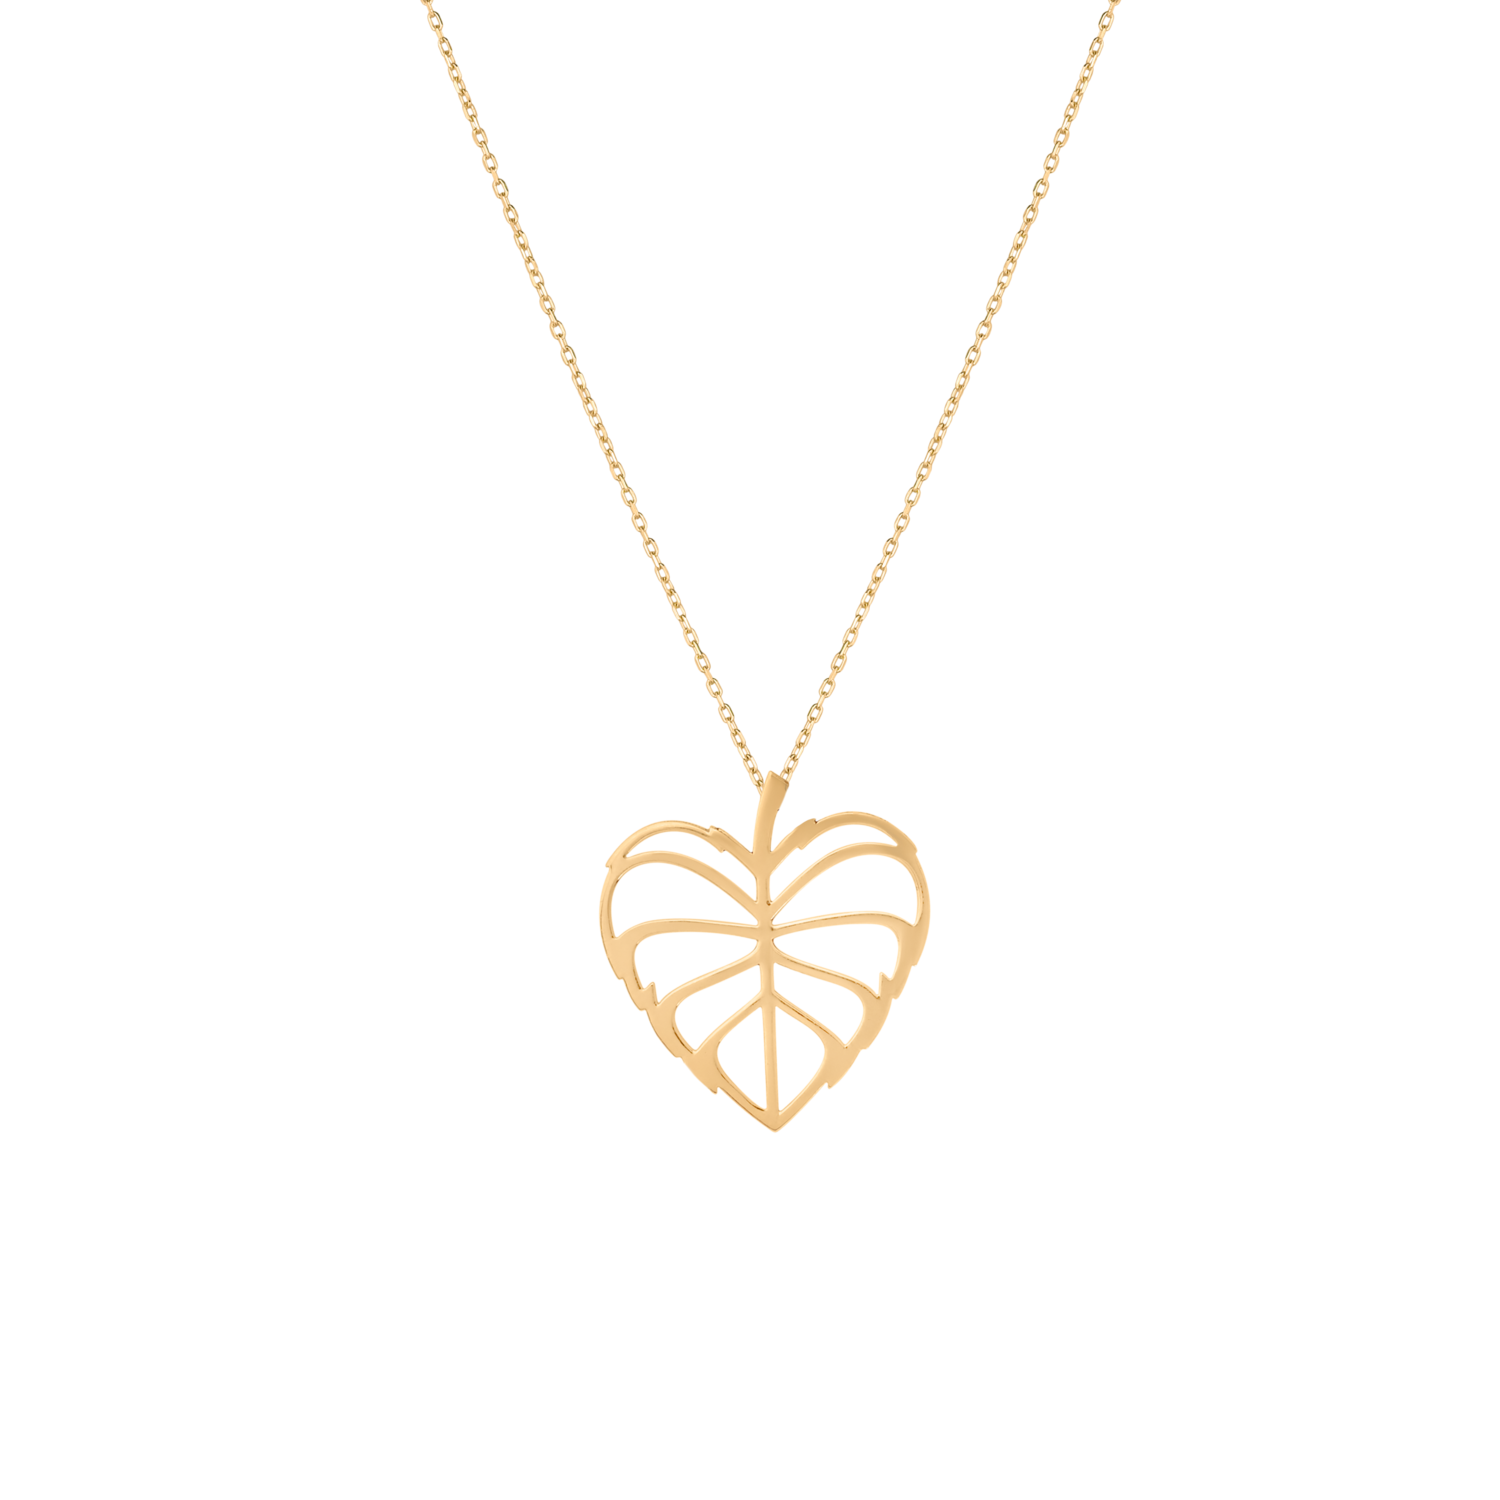 Leaves Gold Necklace Heart